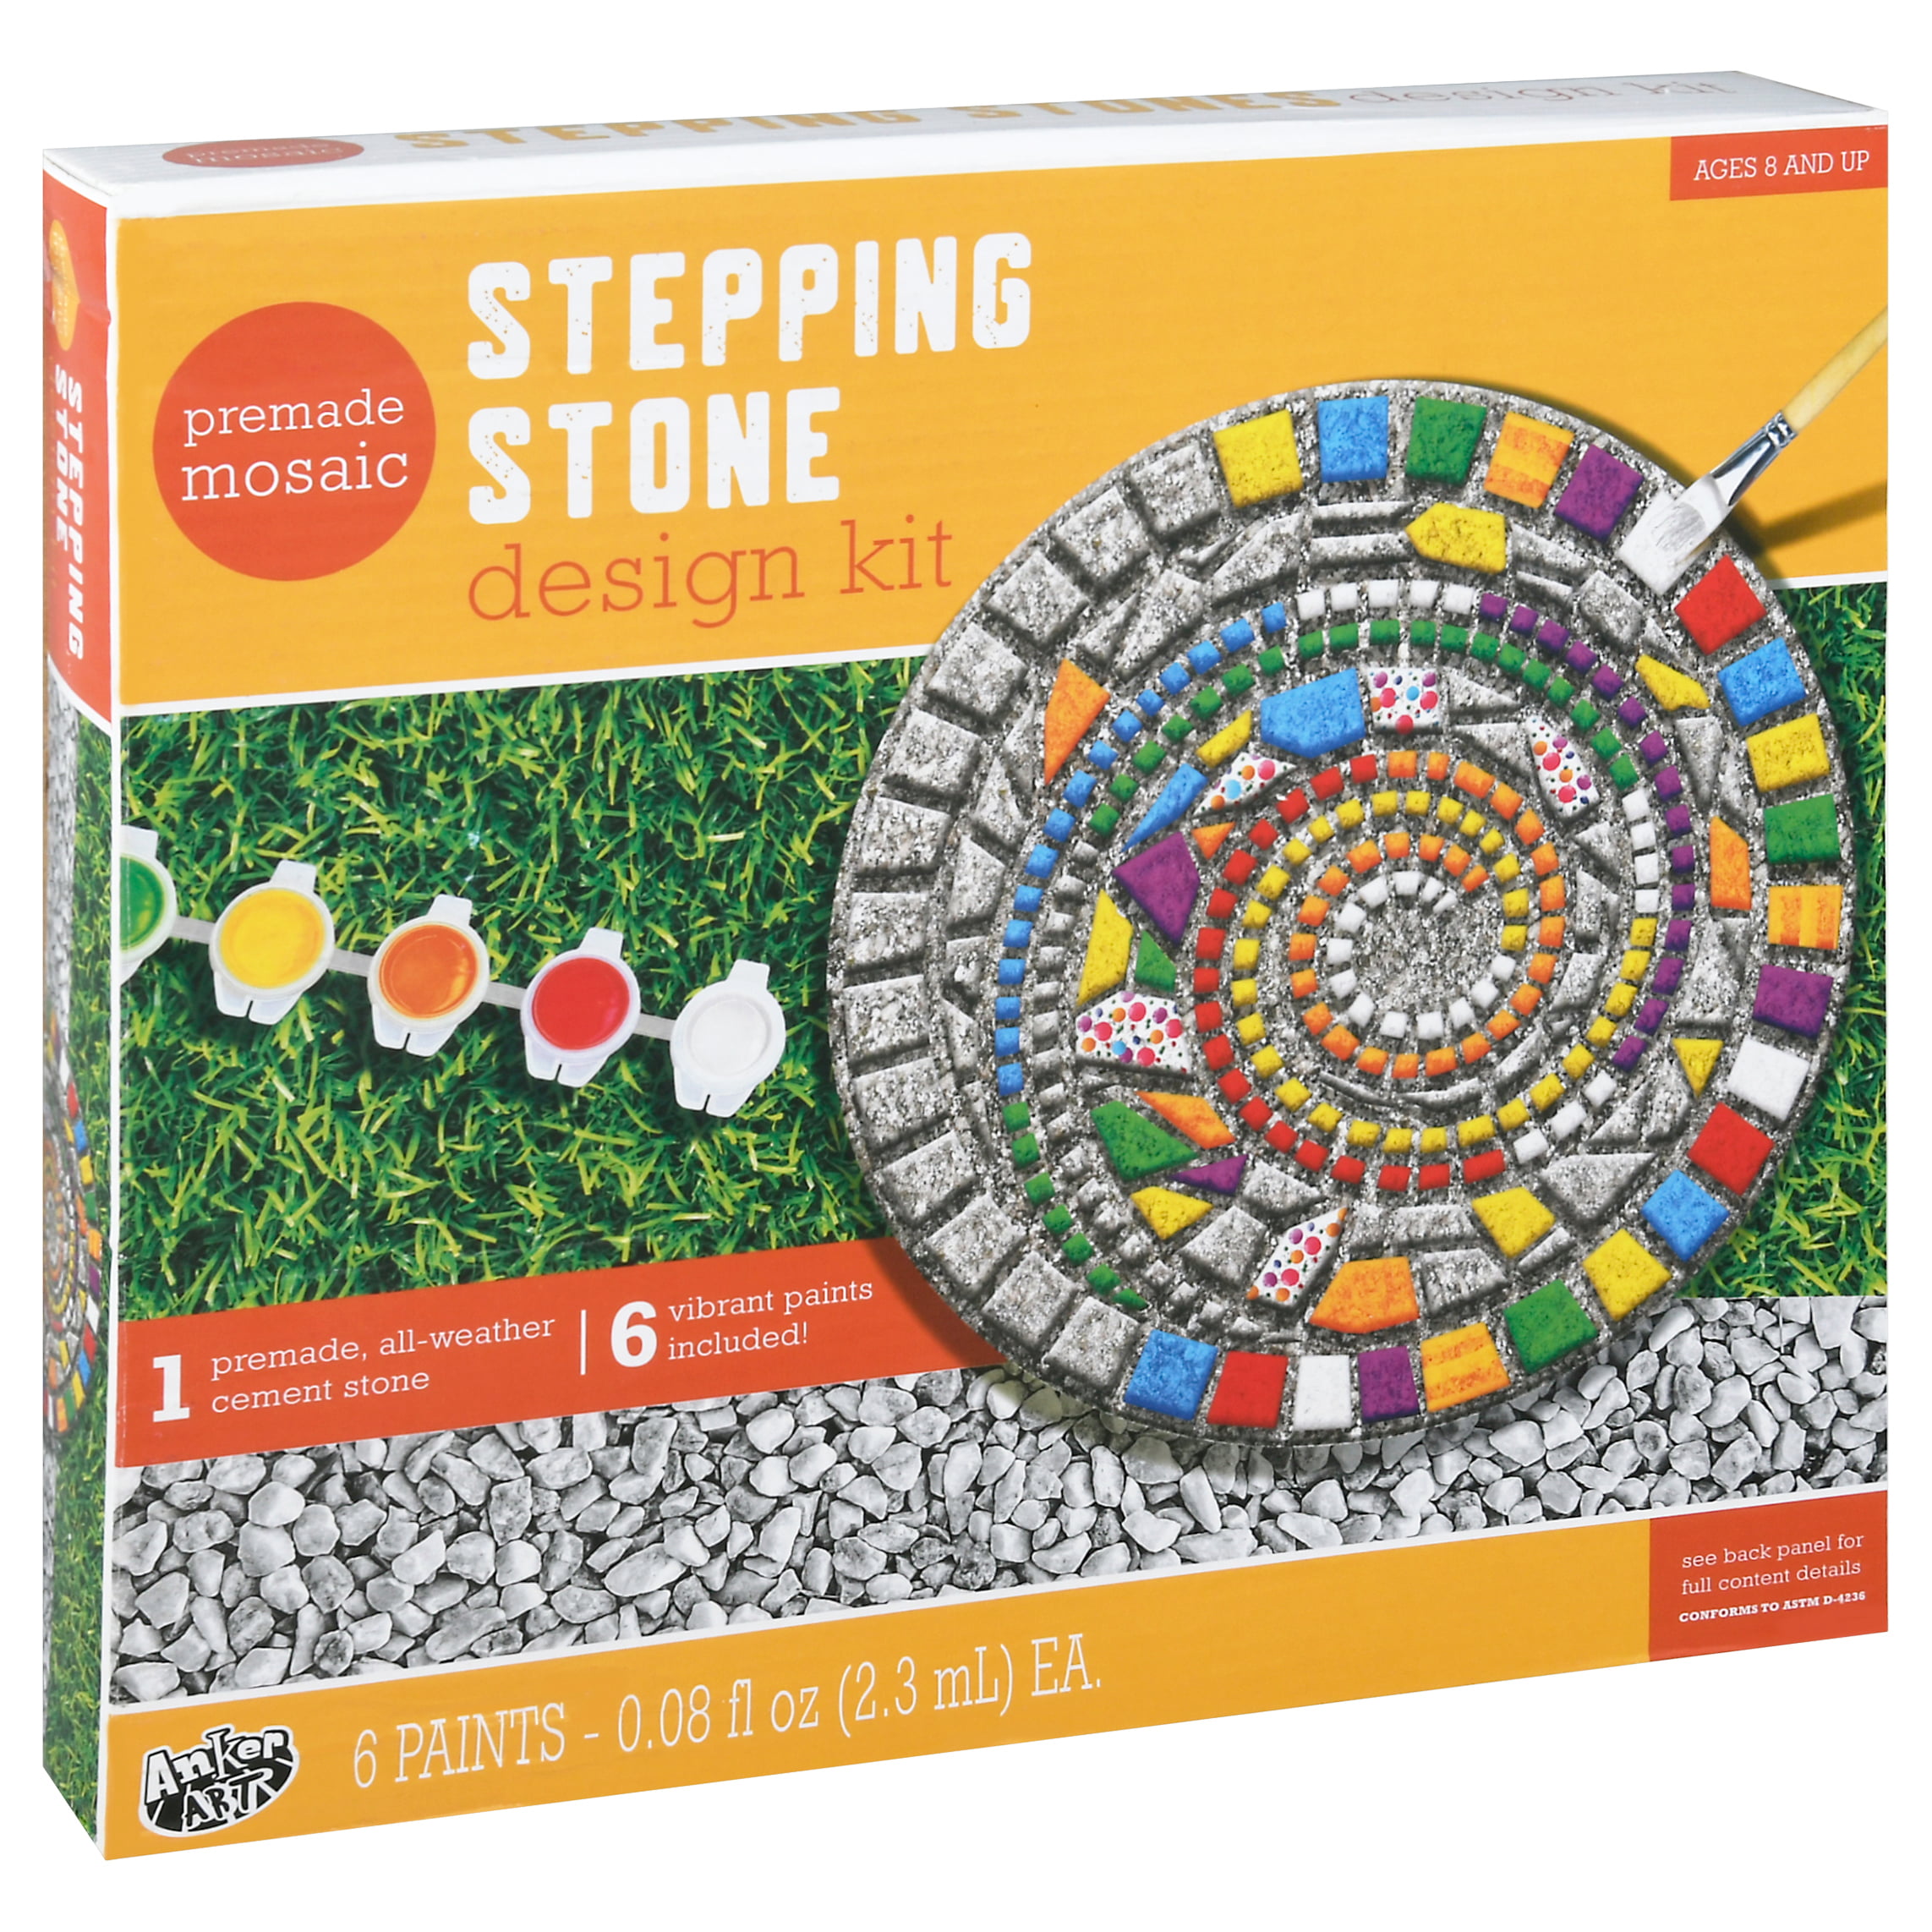 IFLOVE Paint Your Own Stepping Stones for Kids,5 Pack DIY Ceramic Painting  Craft Kits,Arts and Crafts for Kids Ages 4-8,Painting Crafts for Girls Ages